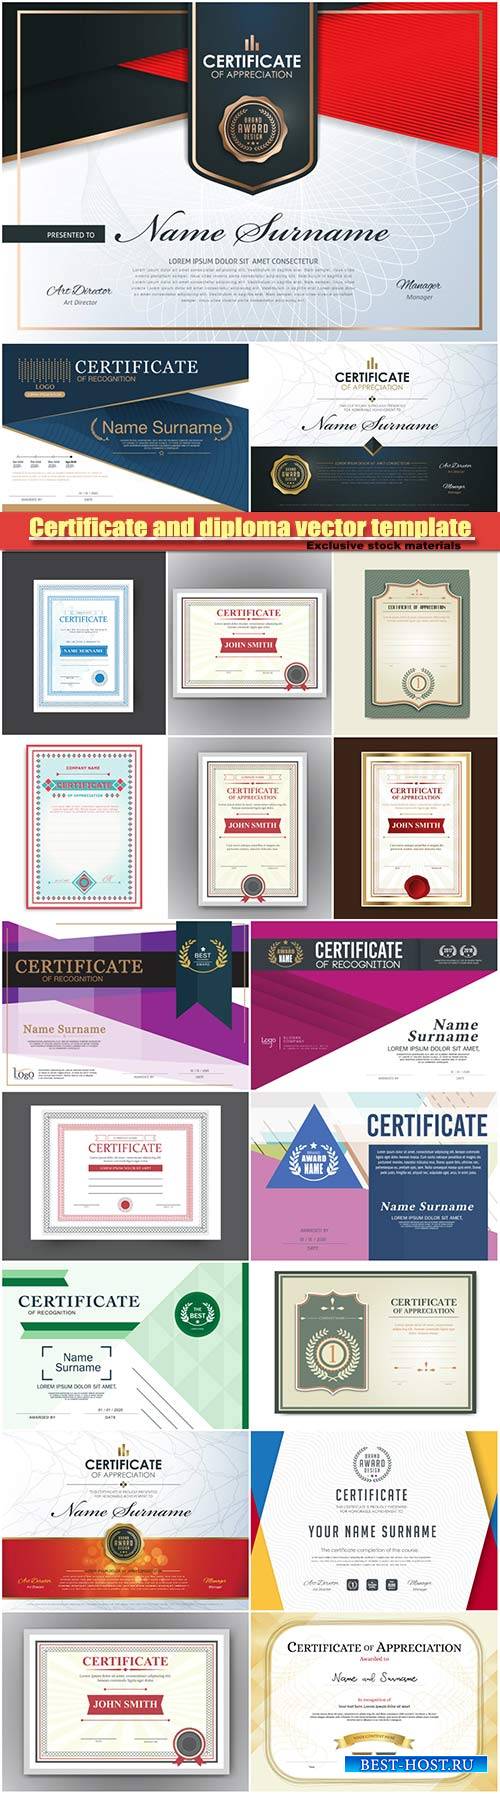 Certificate and diploma design template